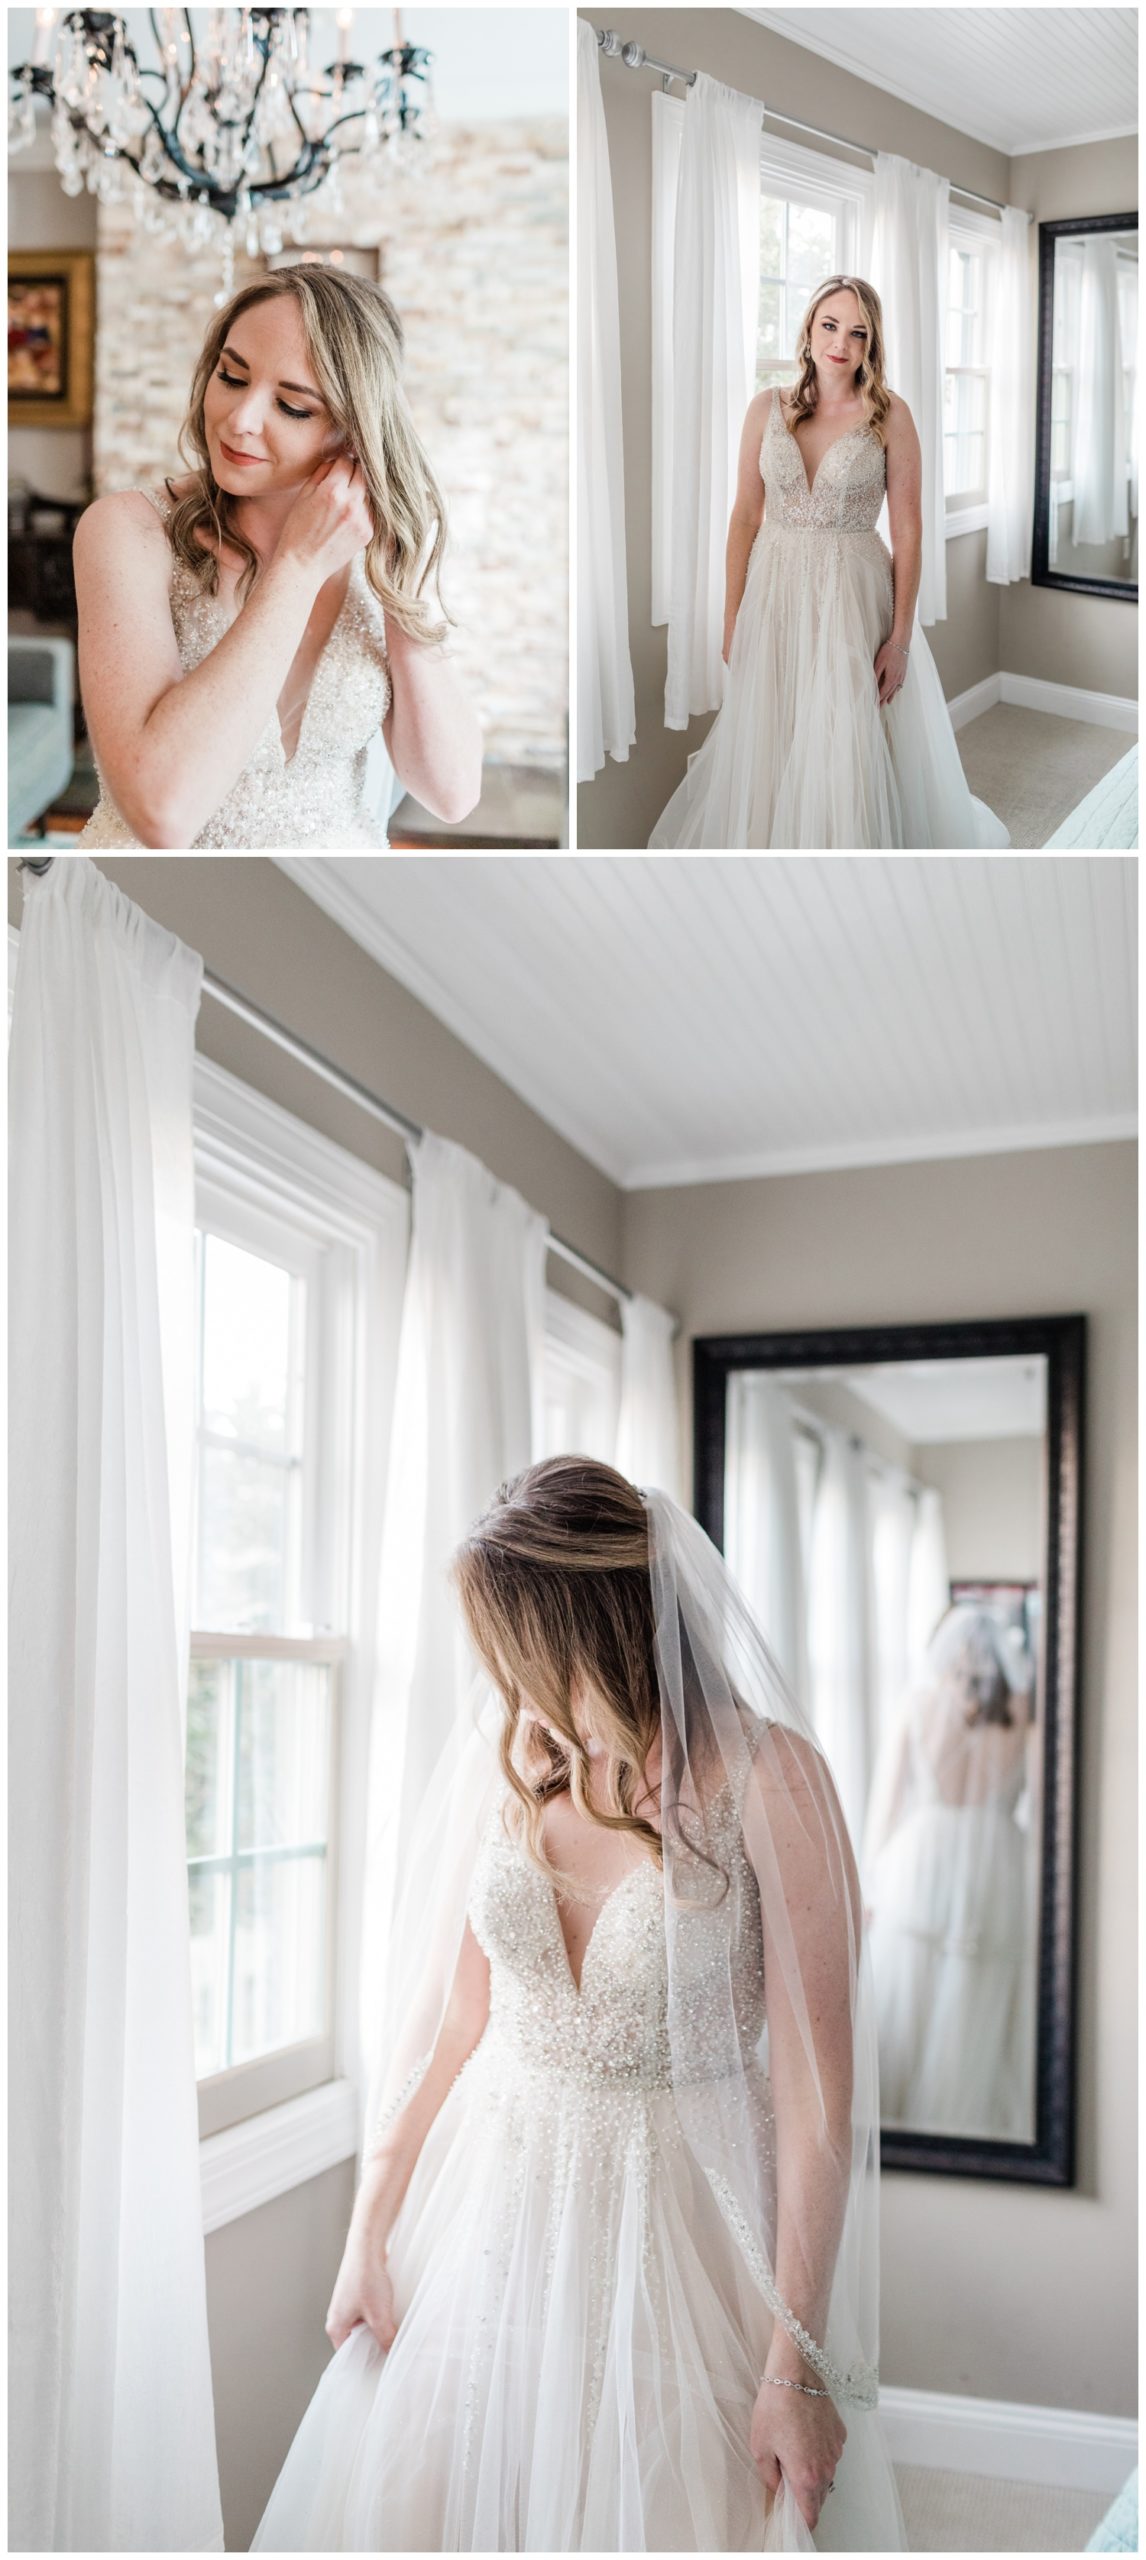 Getting ready photos - the Savannah Elopement Package